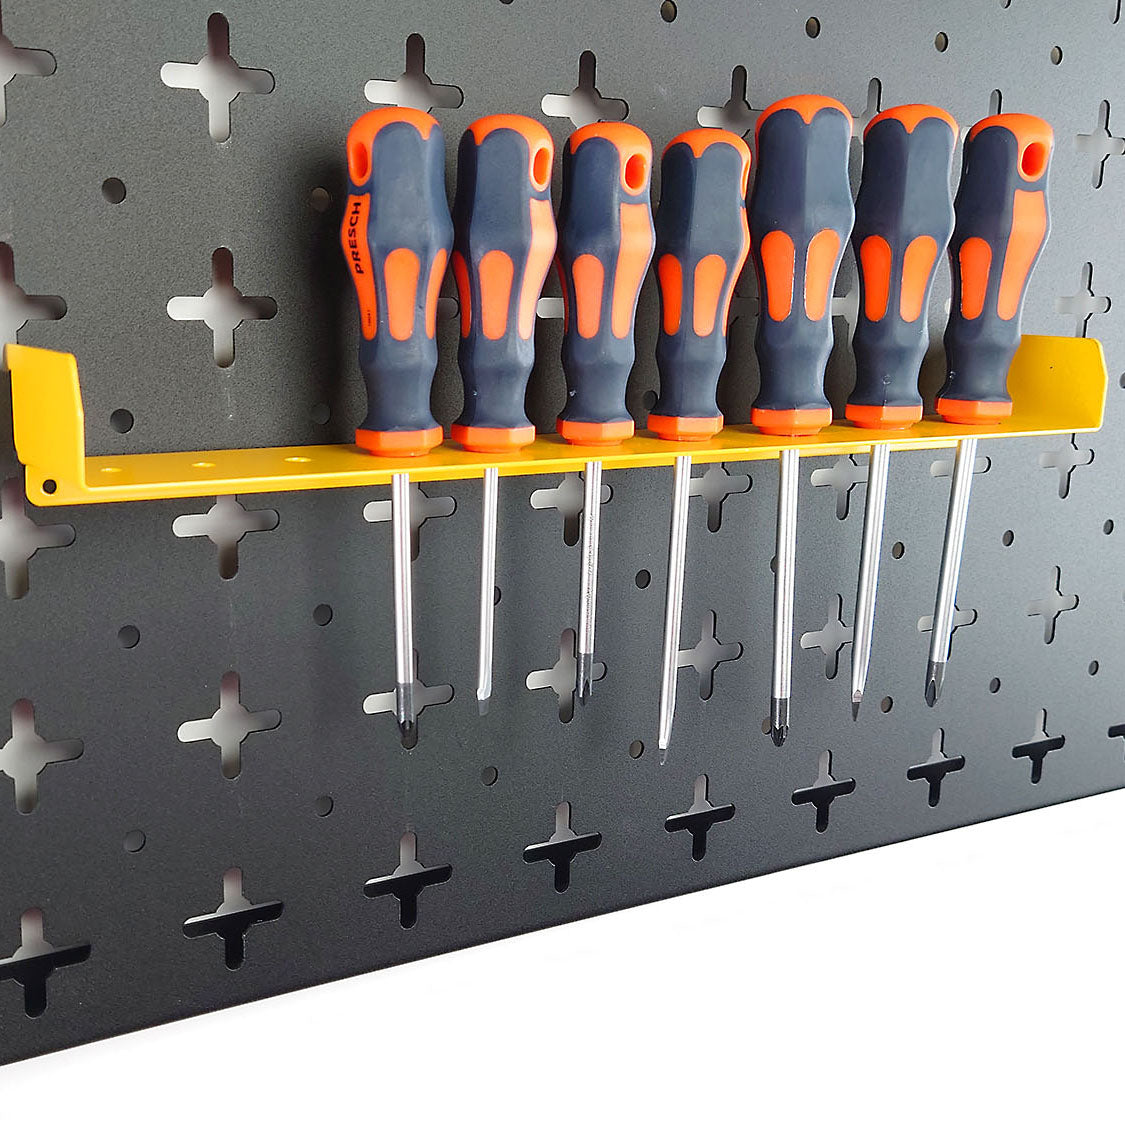 Nukeson Tool Wall - Screwdriver Holder Attachment - Indoor Outdoors